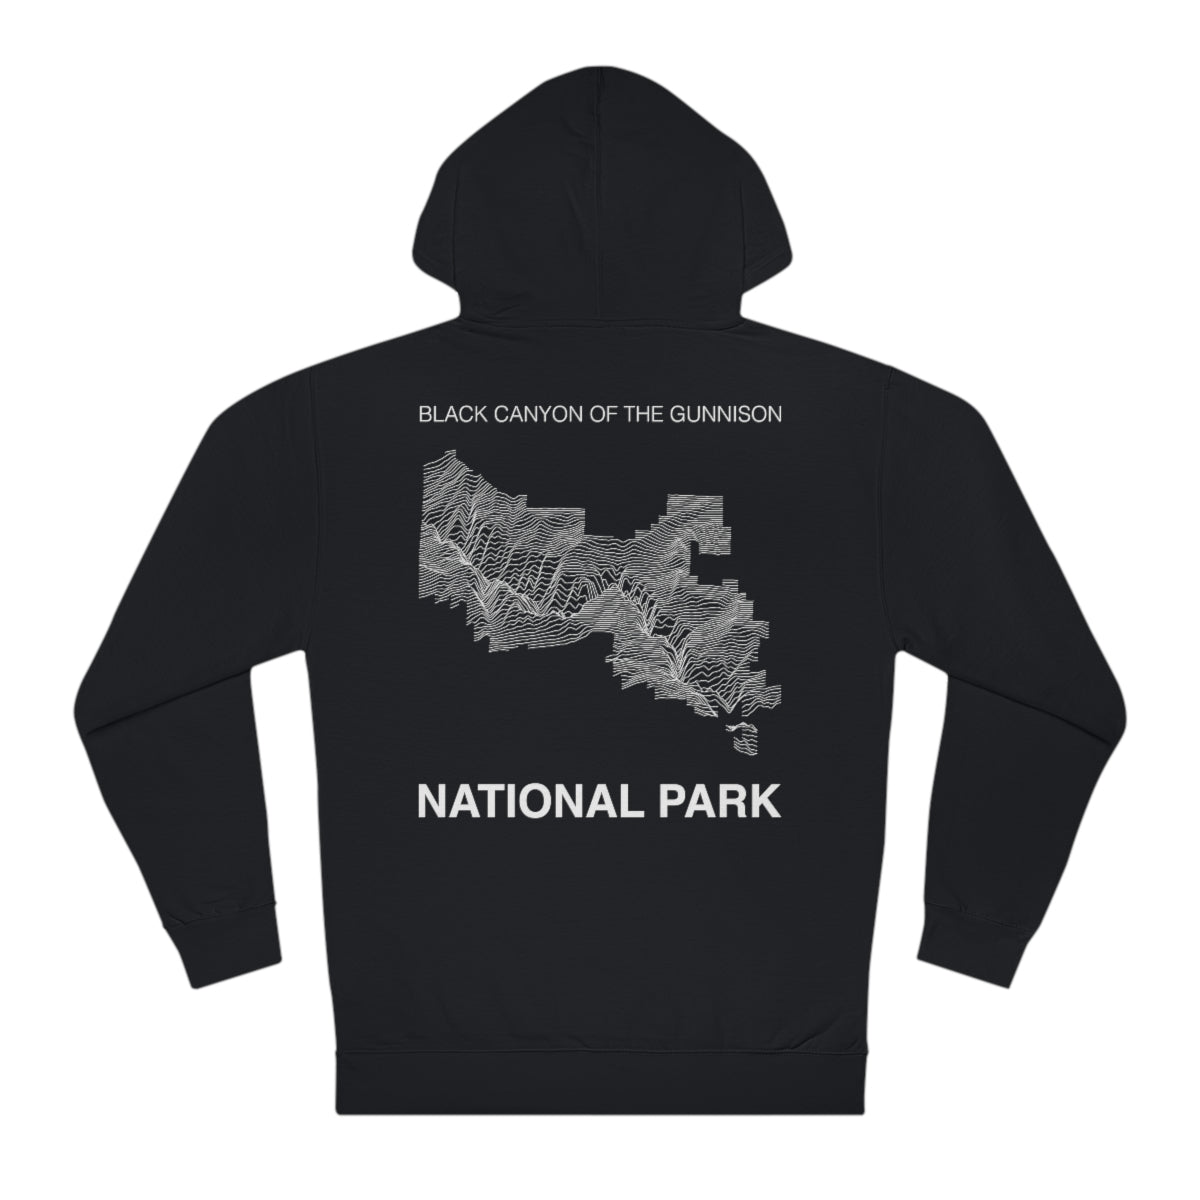 Black Canyon of the Gunnison National Park Hoodie - Lines